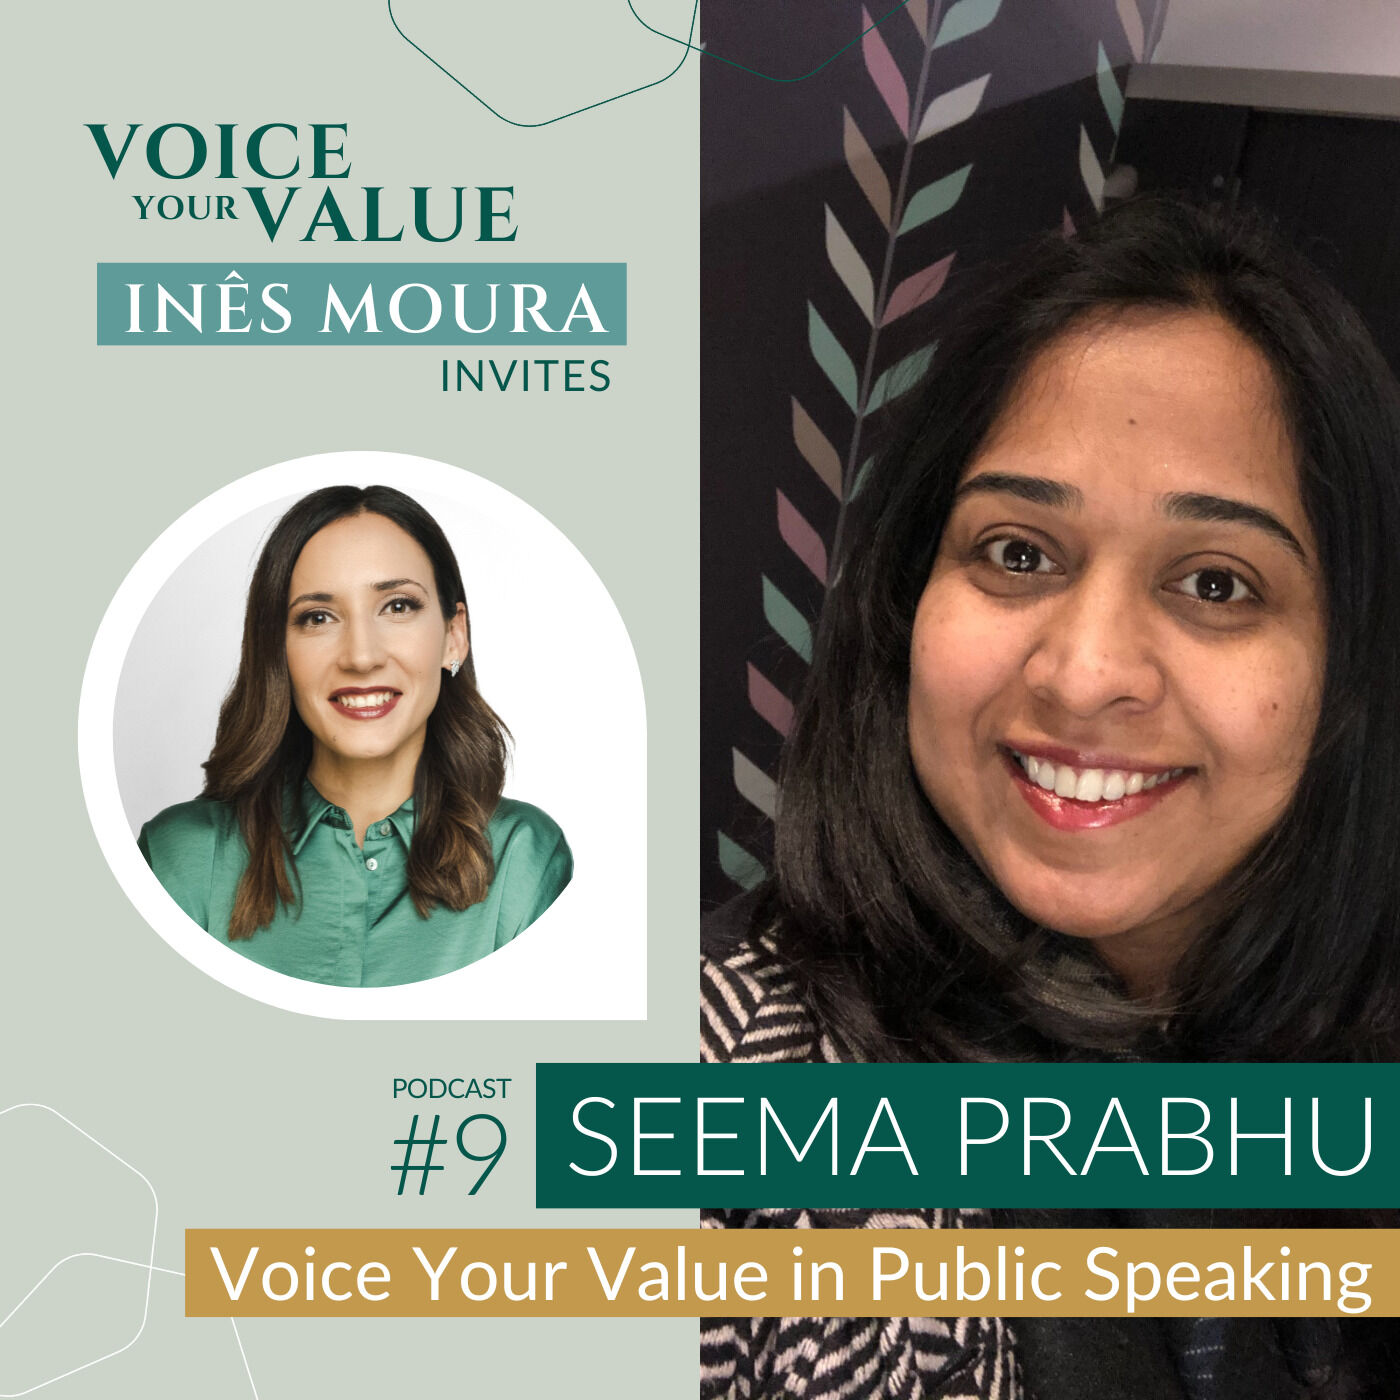 How to Voice your Value in Public Speaking?